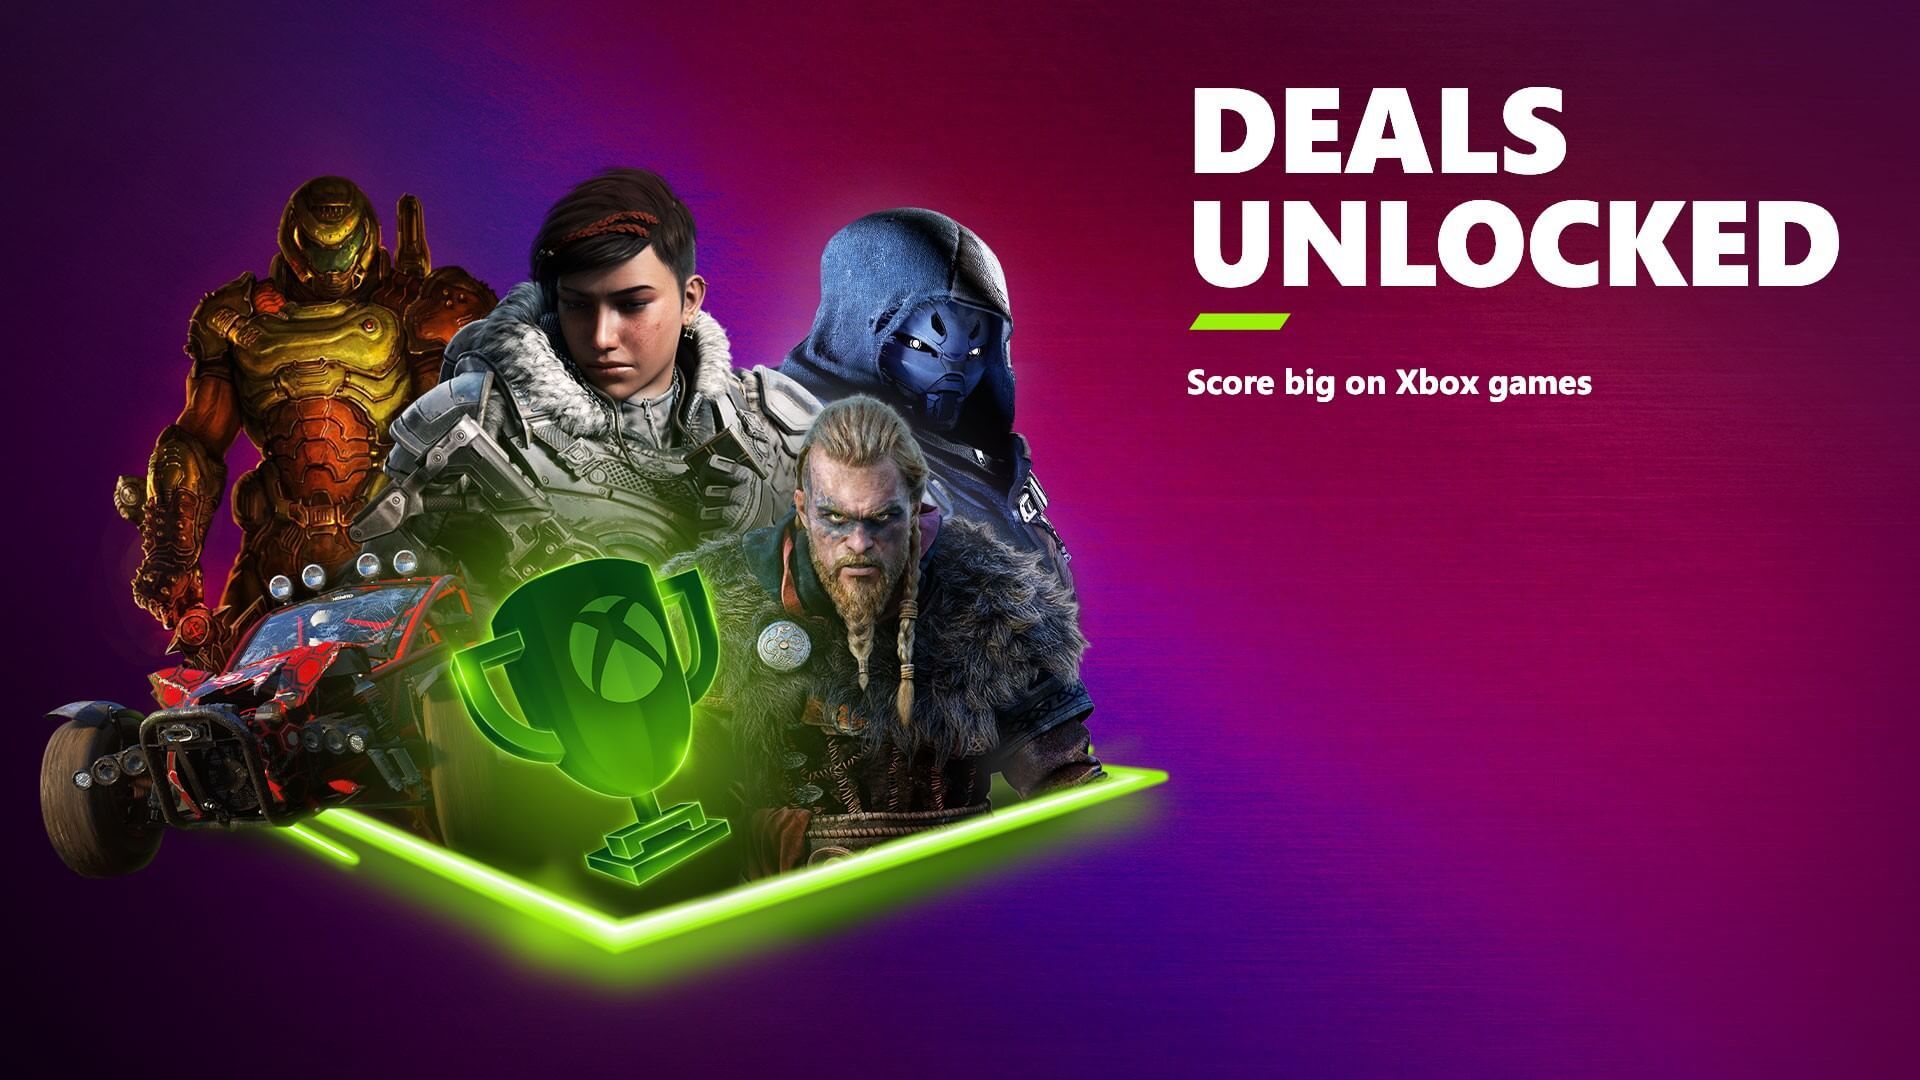 Xbox Live Deals Unlocked Sale Includes Some Fighting Games Discounts